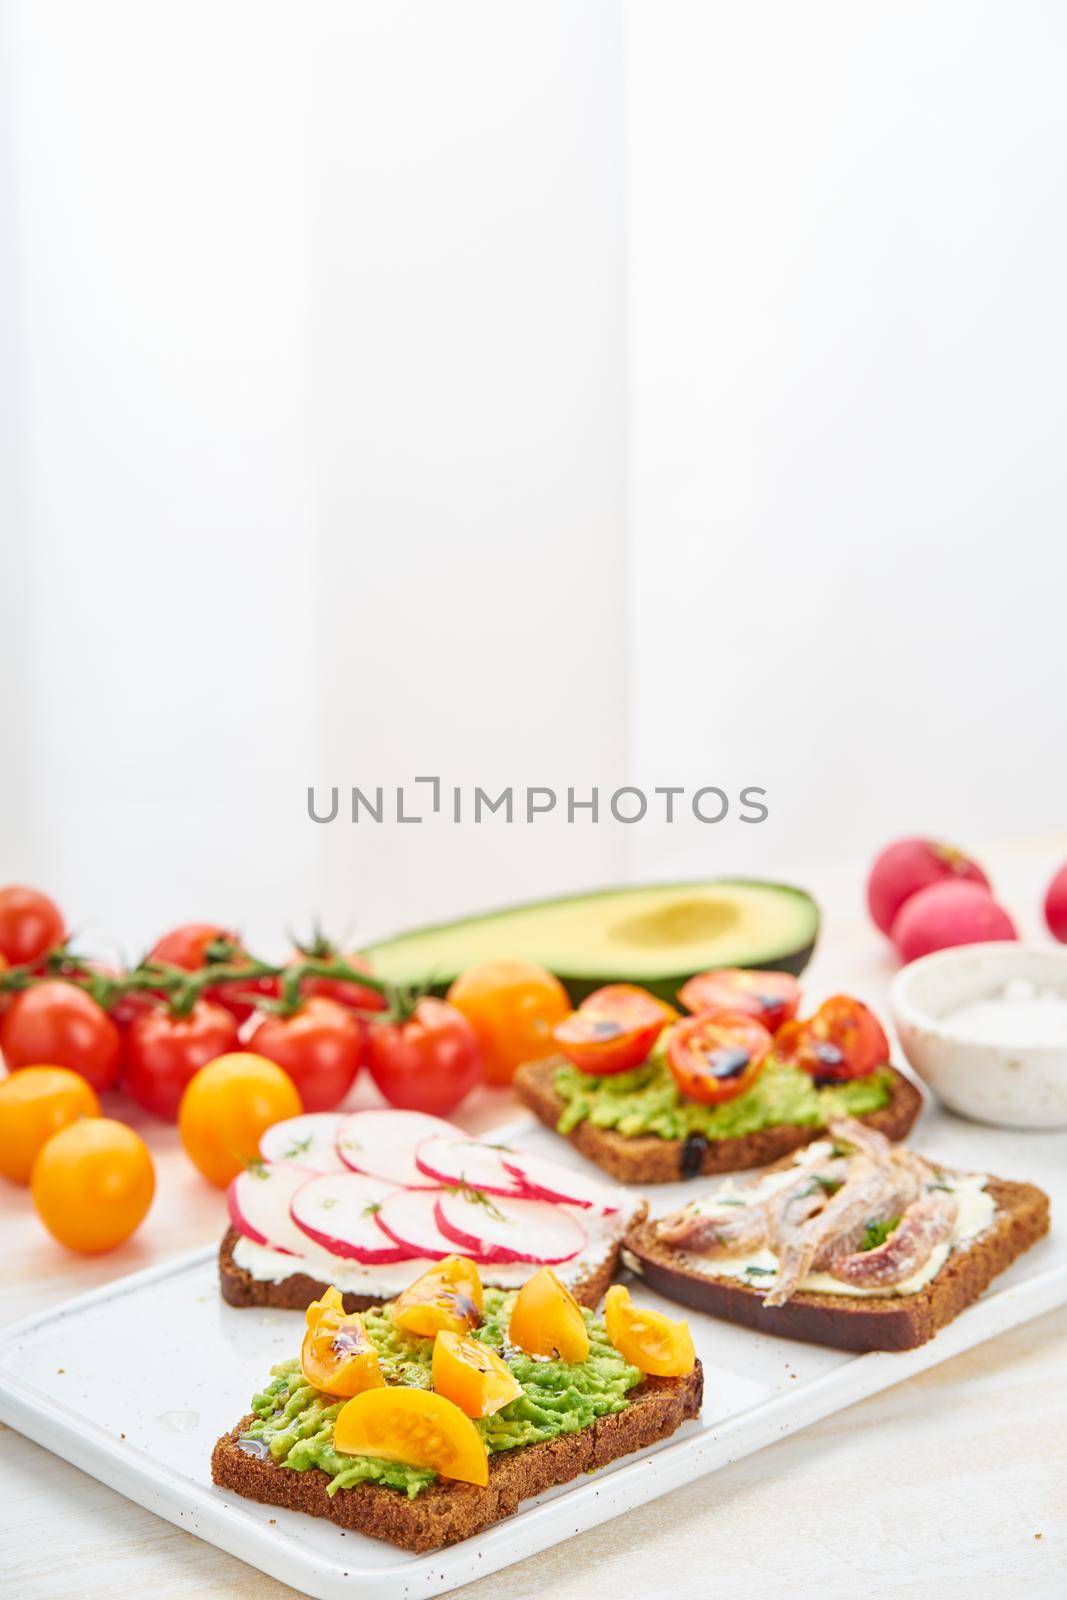 Set of smorrebrods with fish, anchovies, avocado, tomatoes, radish. Side view, copy space, white background.